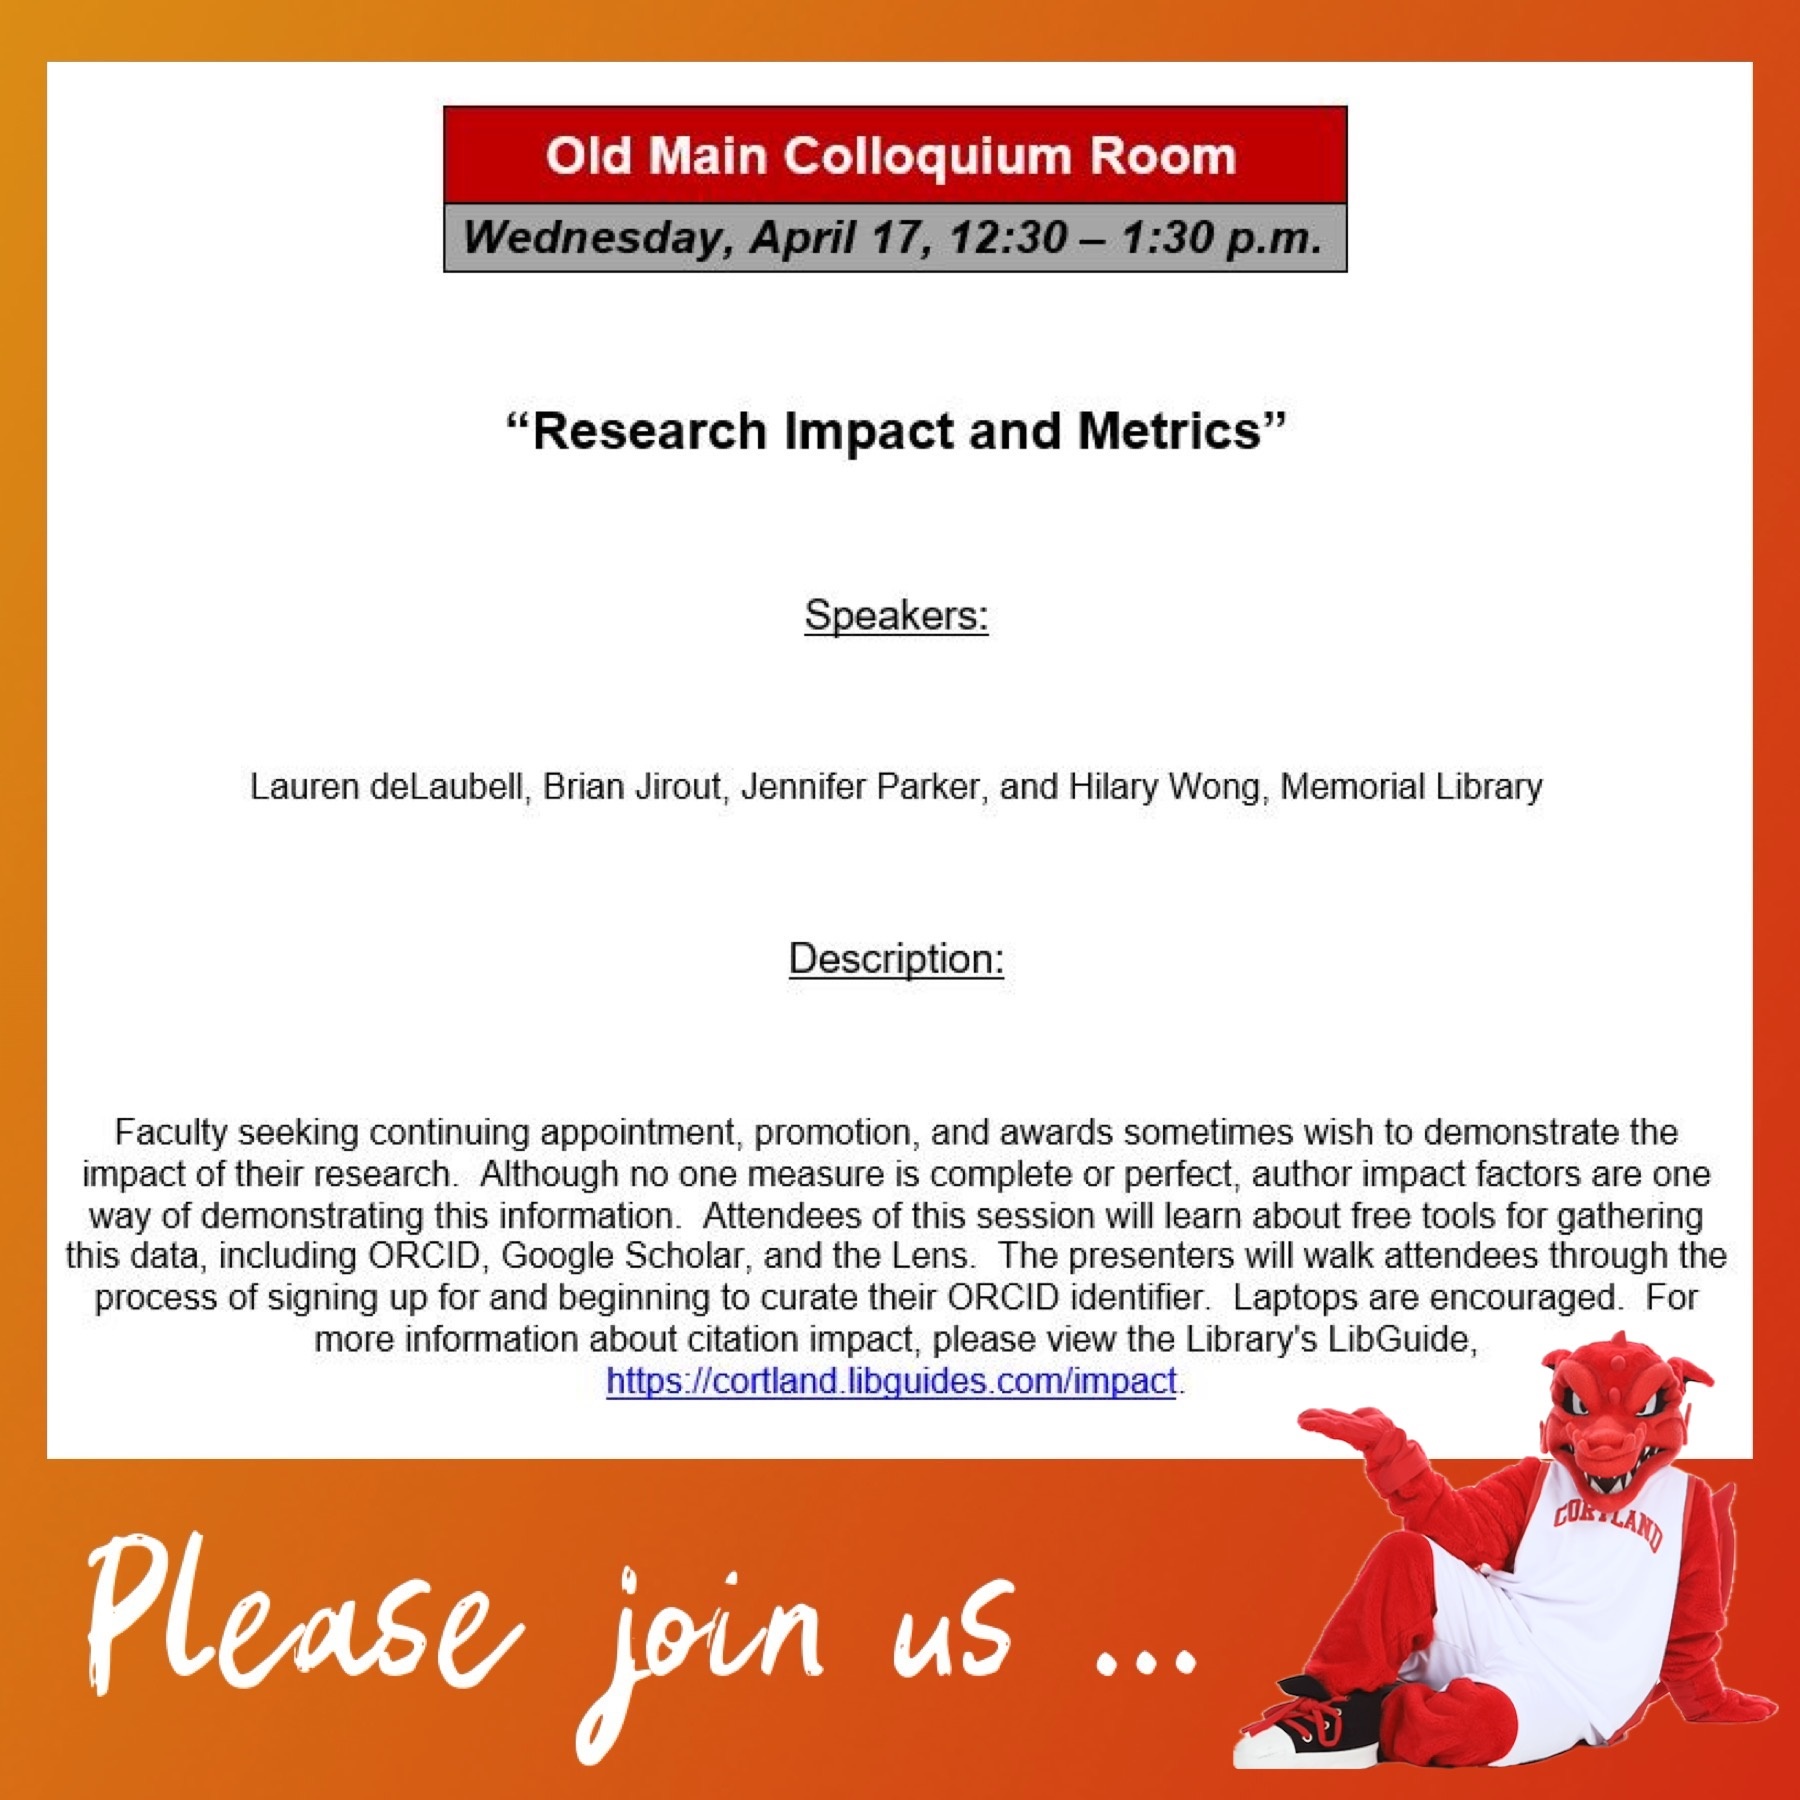 Sandwich Seminar: “Research Impact and Metrics”
Old Main Colloquium Room
Wednesday, April 17, 12:30 – 1:30 p.m.